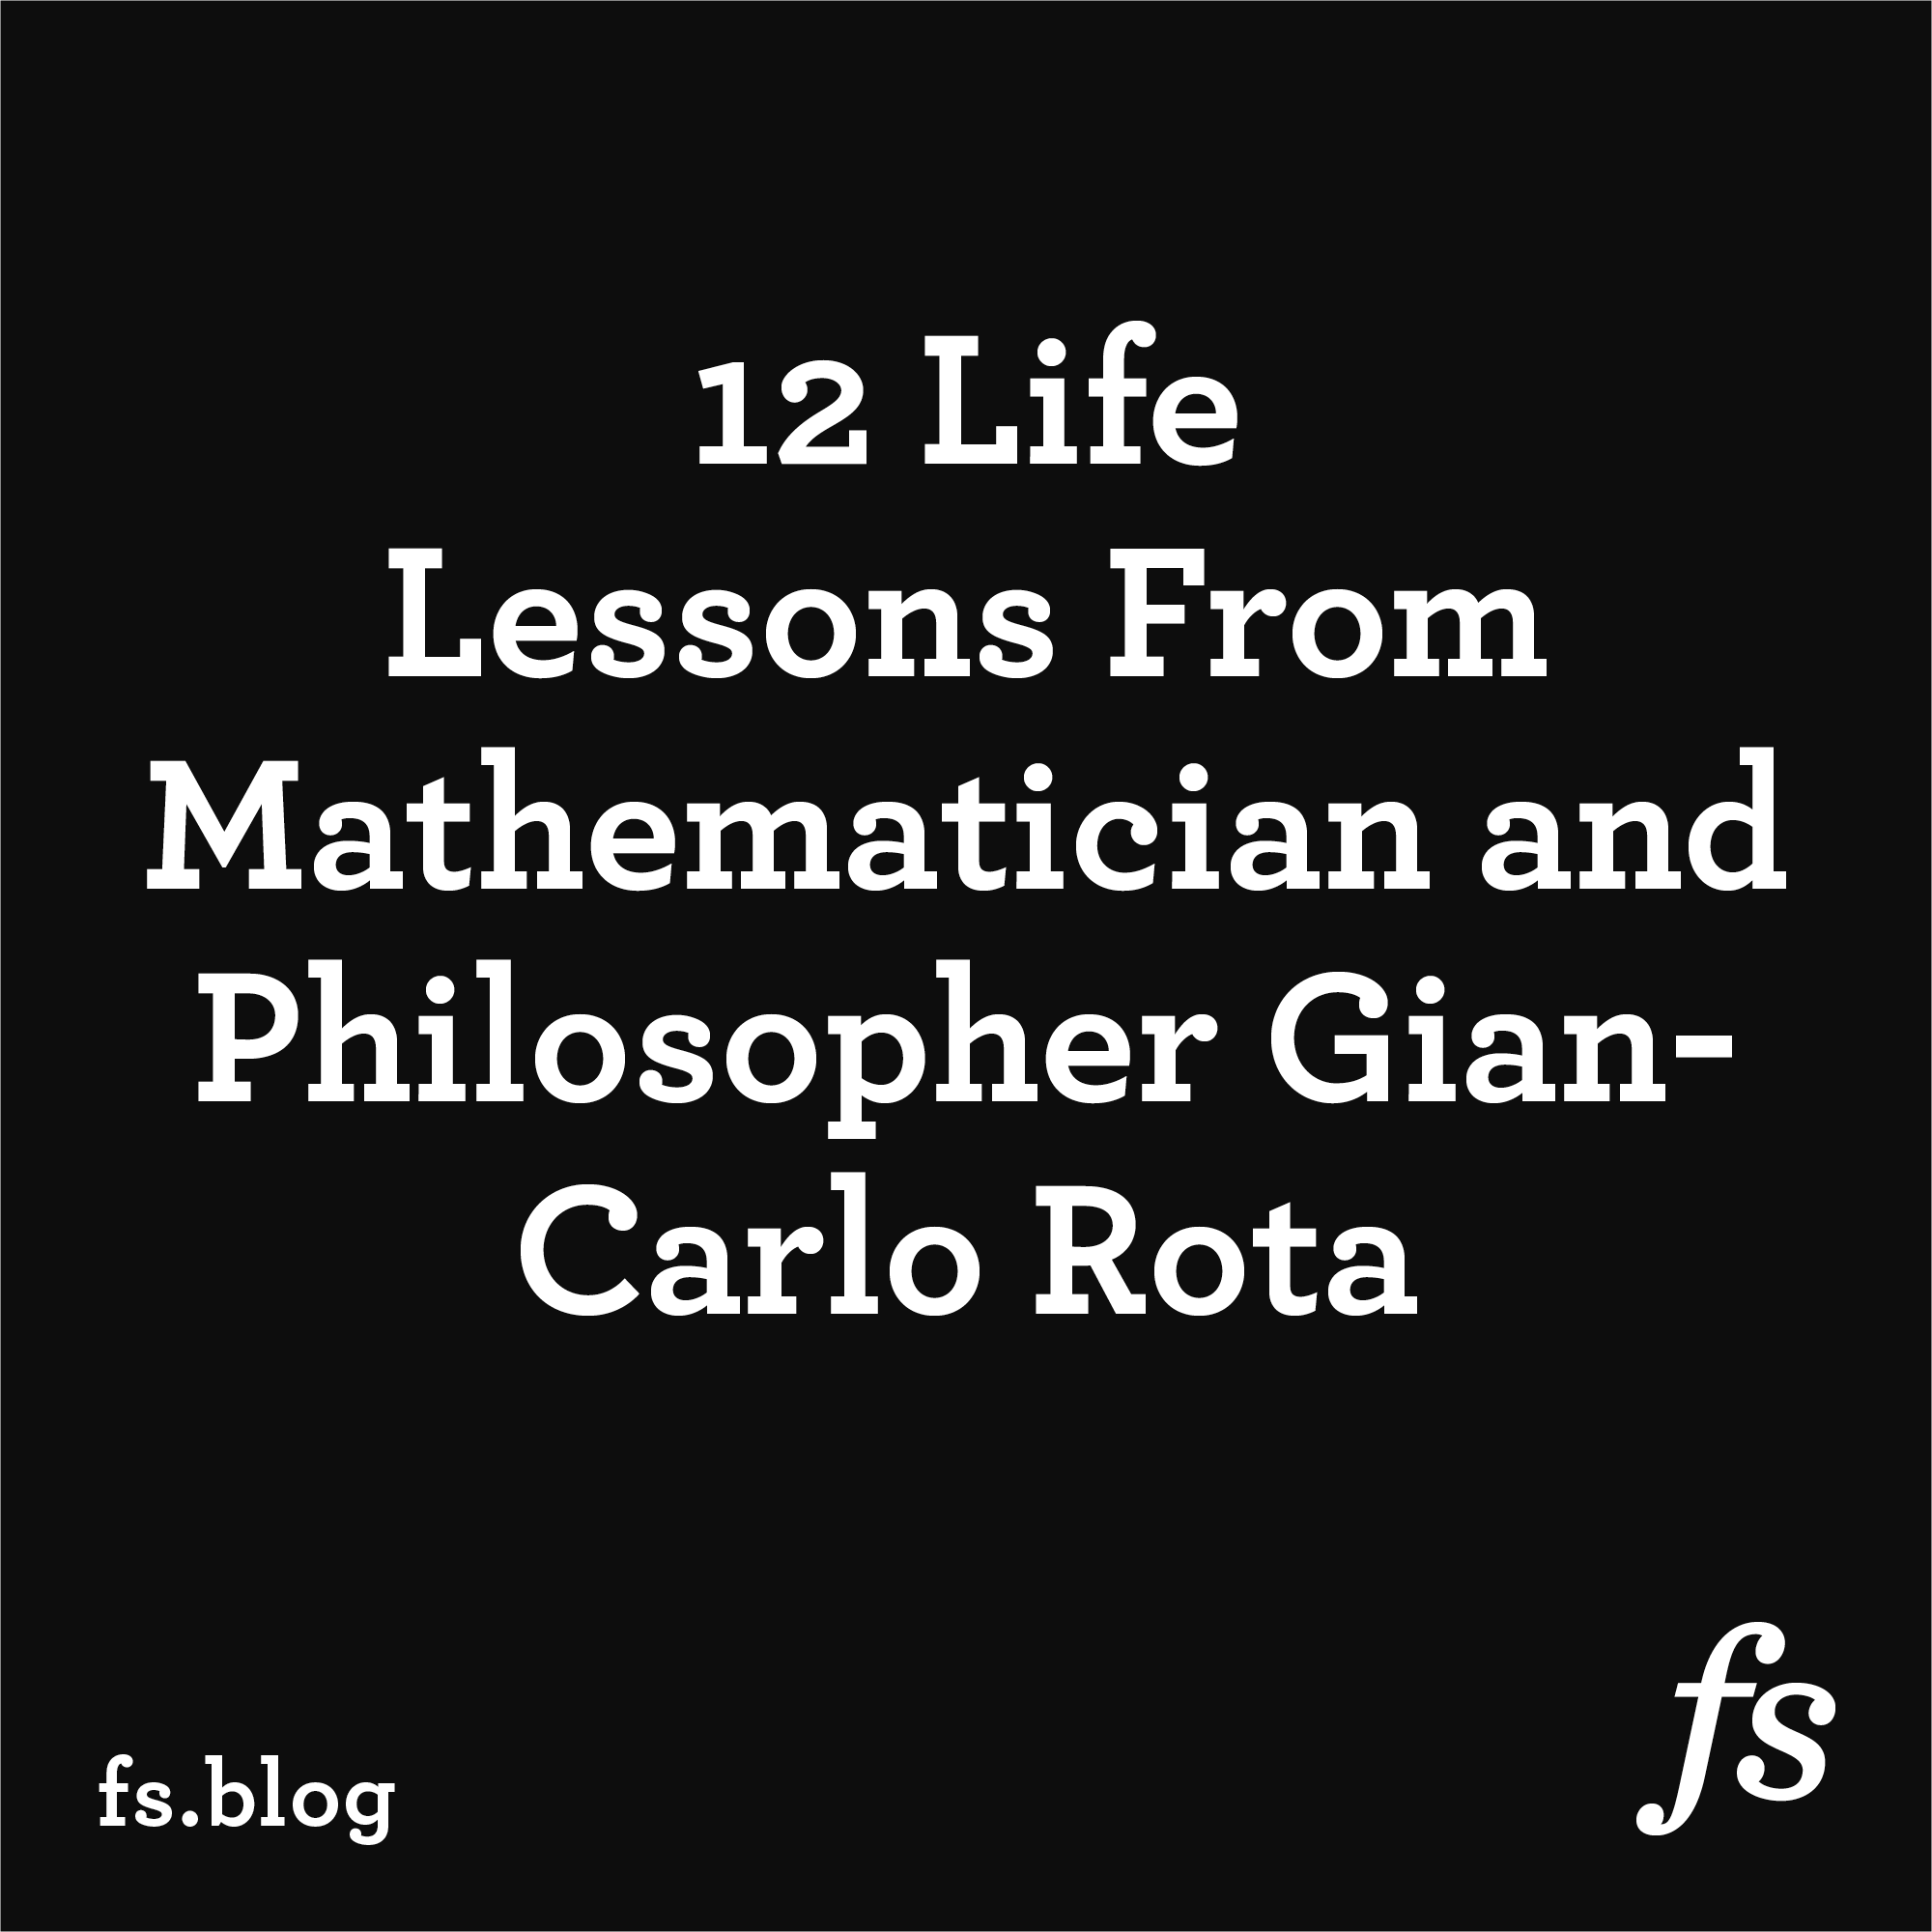 12 Life Lessons From Mathematician and Philosopher Gian-Carlo Rota - Farnam Street